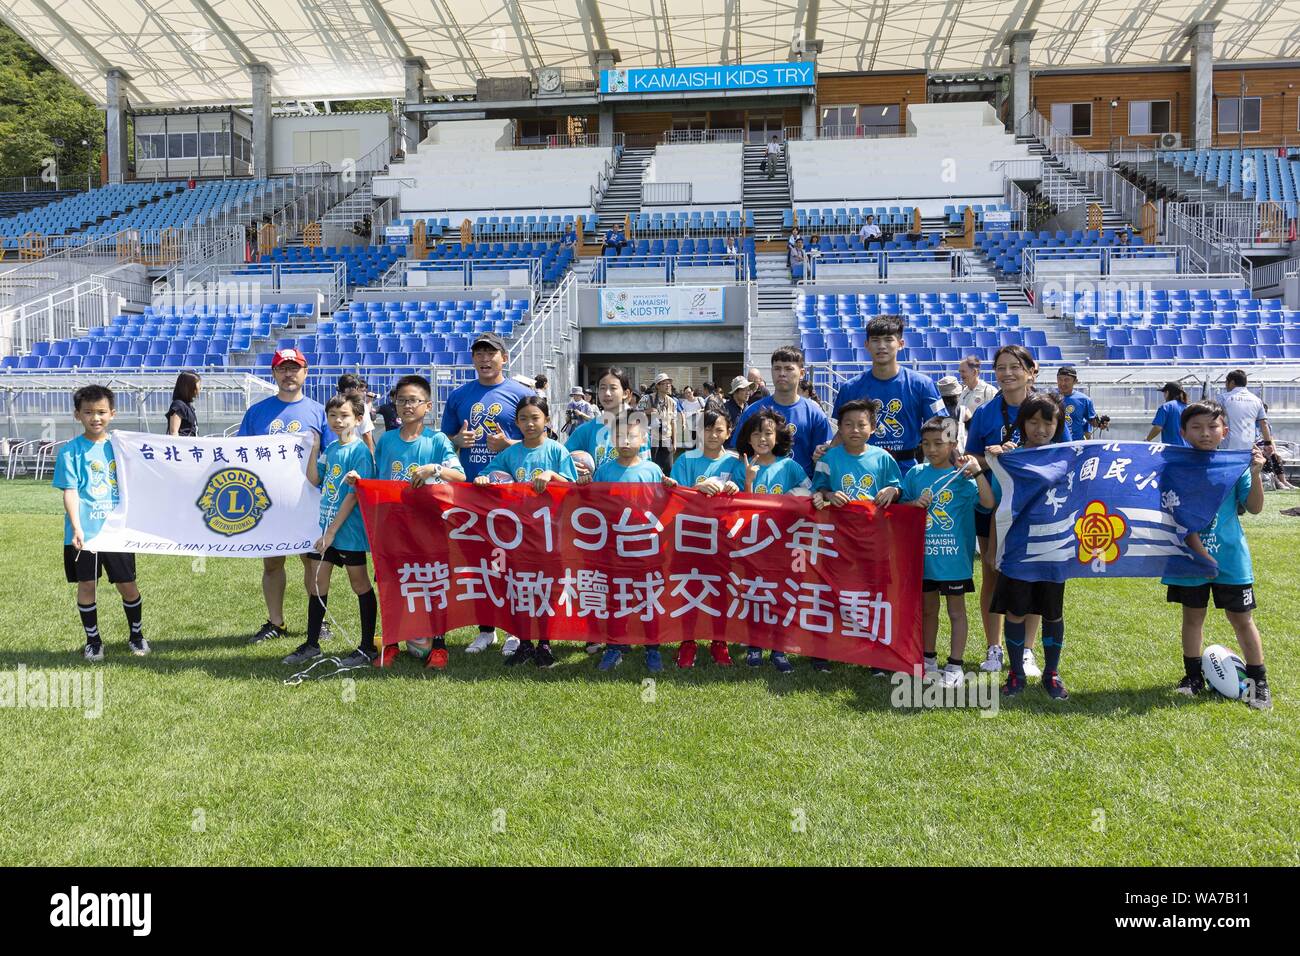 Kamaishi, Japan. 18 August 2019.  Elementary-school children from Taiwan and organizers of the ''Kamaishi Kids Try'' sports event pose for the cameras at Kamaishi Unosumai Memorial Stadium. The ''Tohoku Media Tour: Iwate Course'' is organized by the Tokyo Metropolitan Government in collaboration with local authorities to showcase the recovery efforts in Tohoku area affected by the 2011 Great East Japan Earthquake and Tsunami.  Th Credit: ZUMA Press, Inc./Alamy Live News Stock Photo